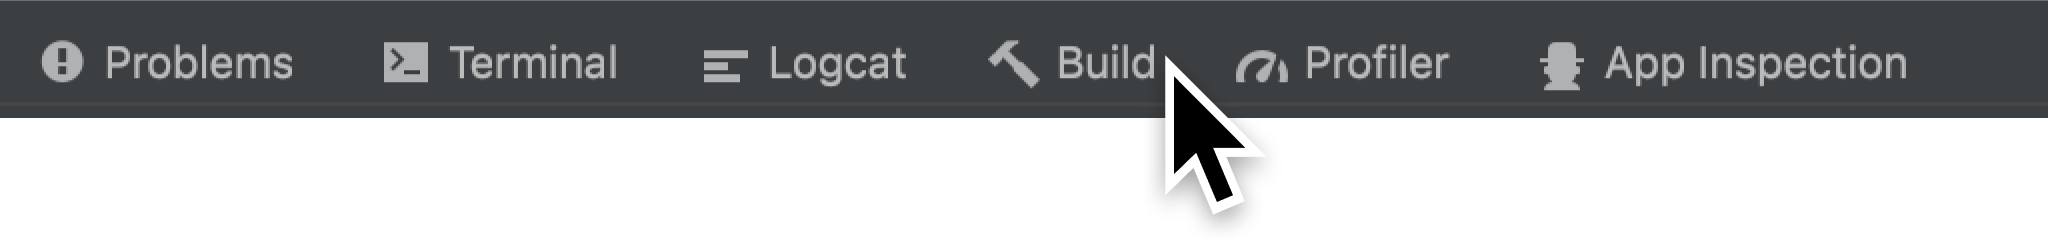 Build tab at bottom of the Android Studio